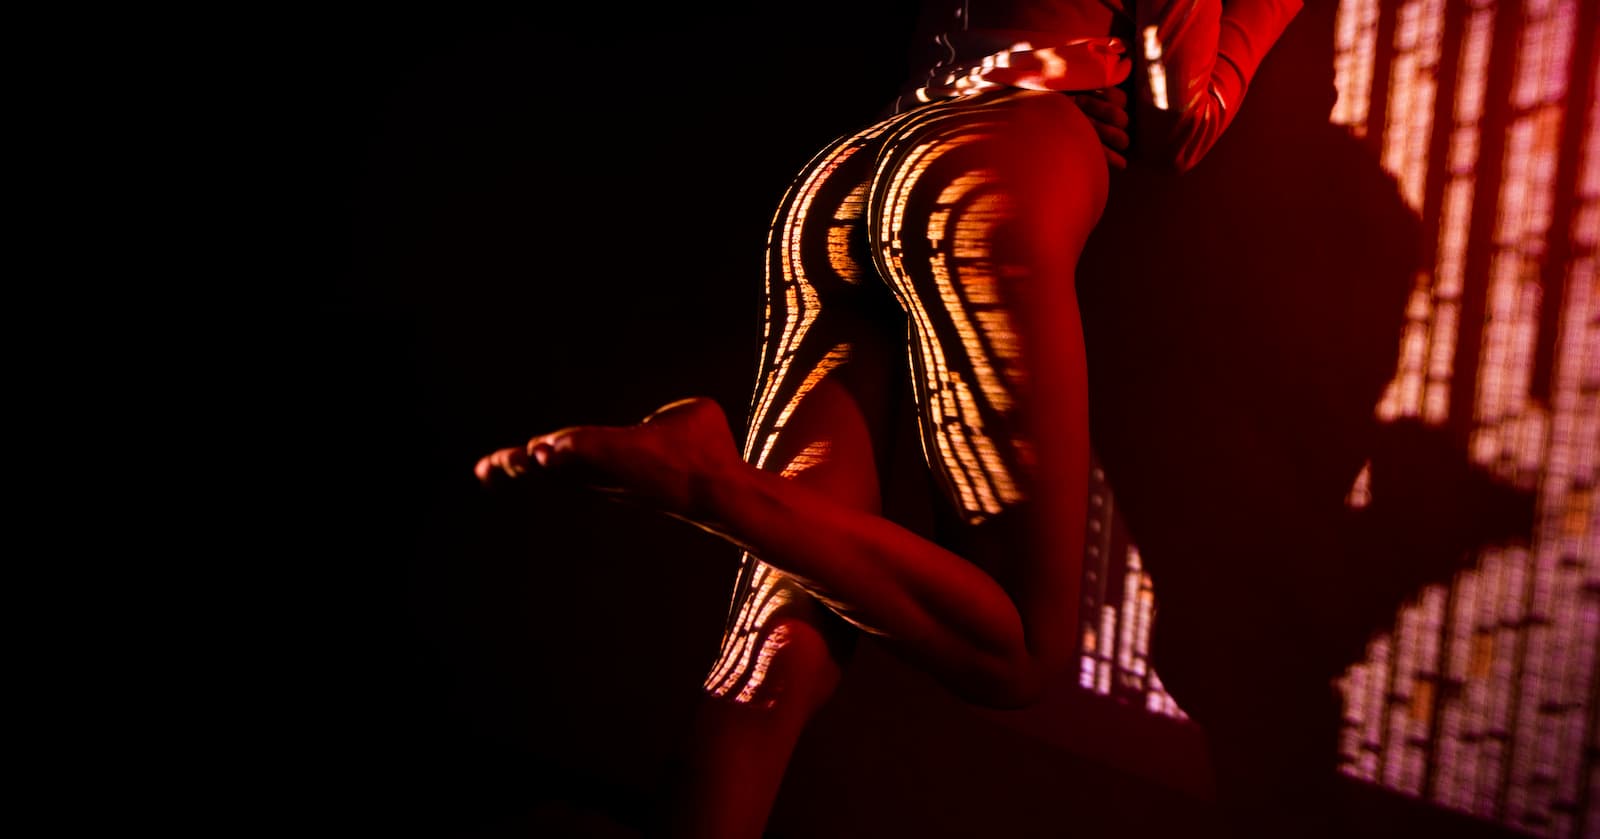 Light patterns projected on woman naked body.